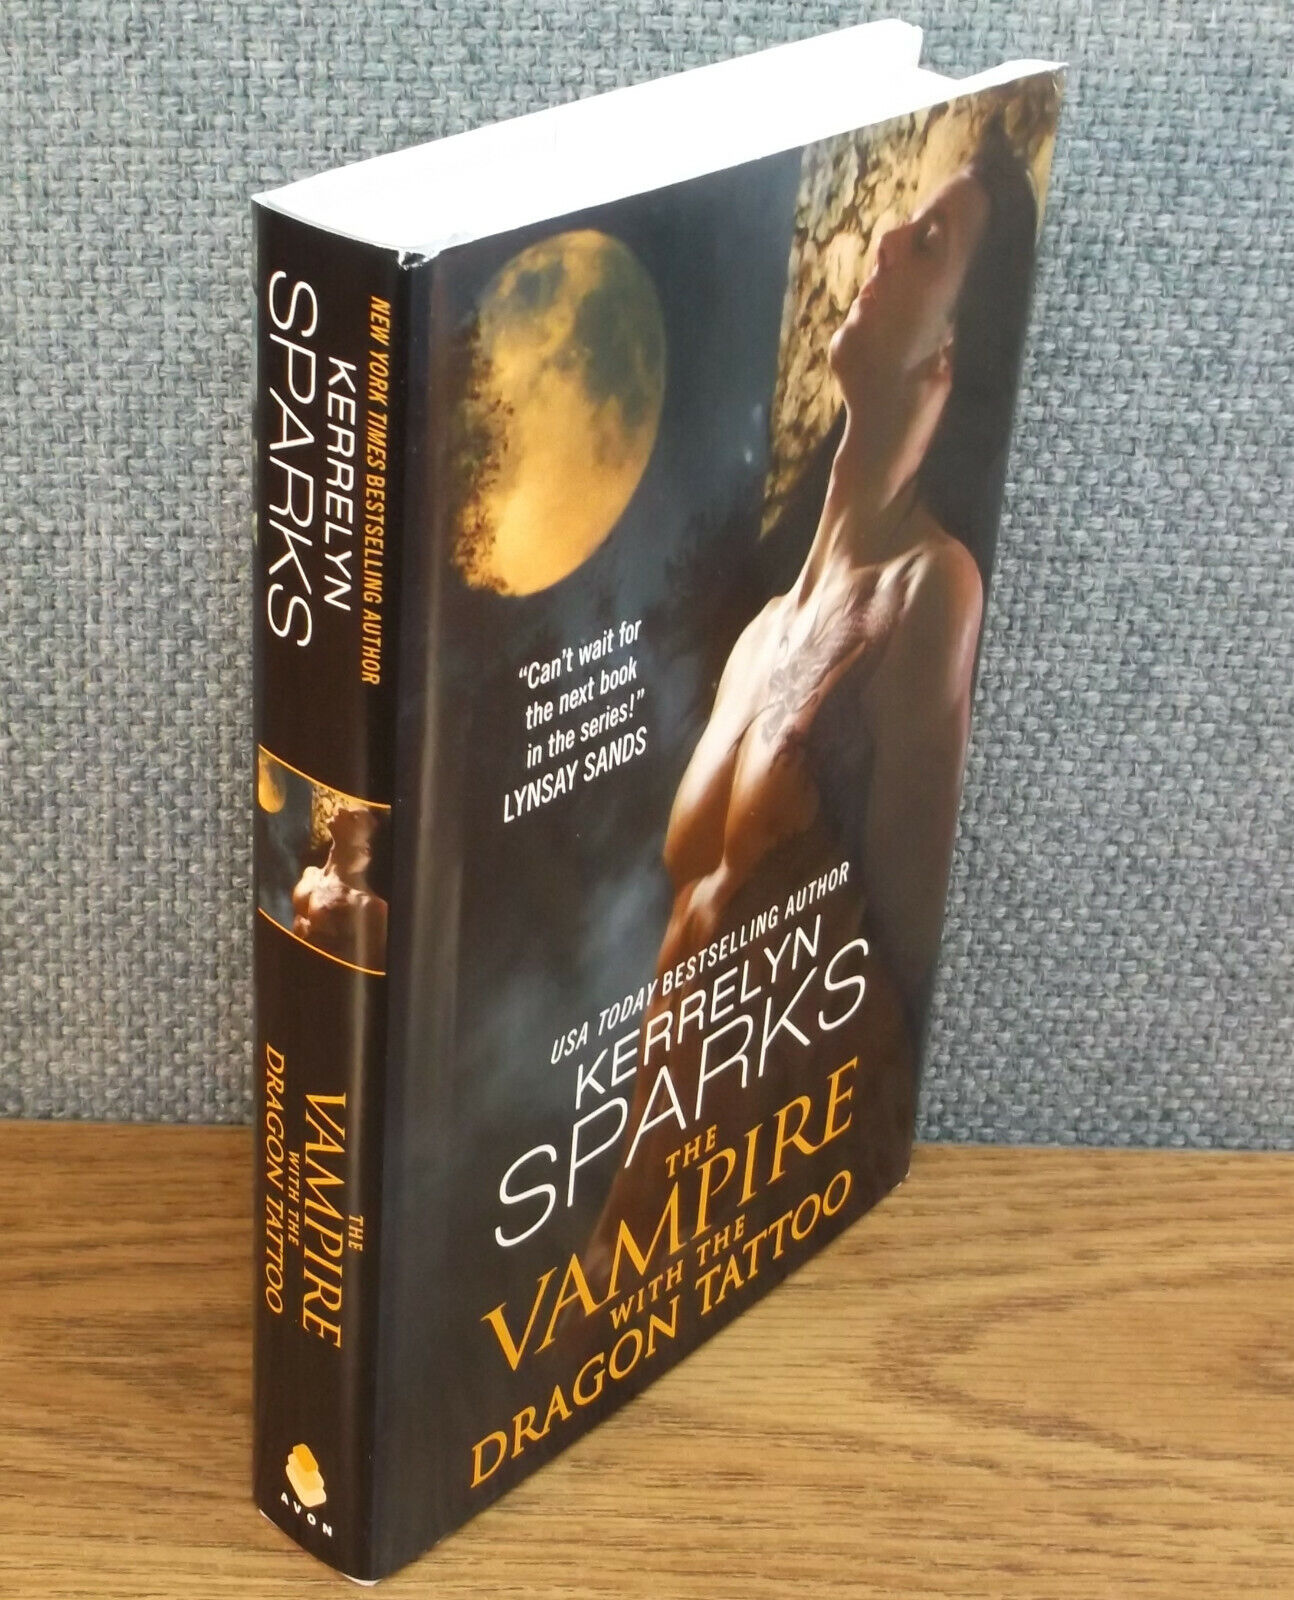 THE VAMPIRE WITH DRAGON TATTOO Kerrelyn Sparks NEW HARDCOVER Love At  Stake#14 9781624907999 | eBay